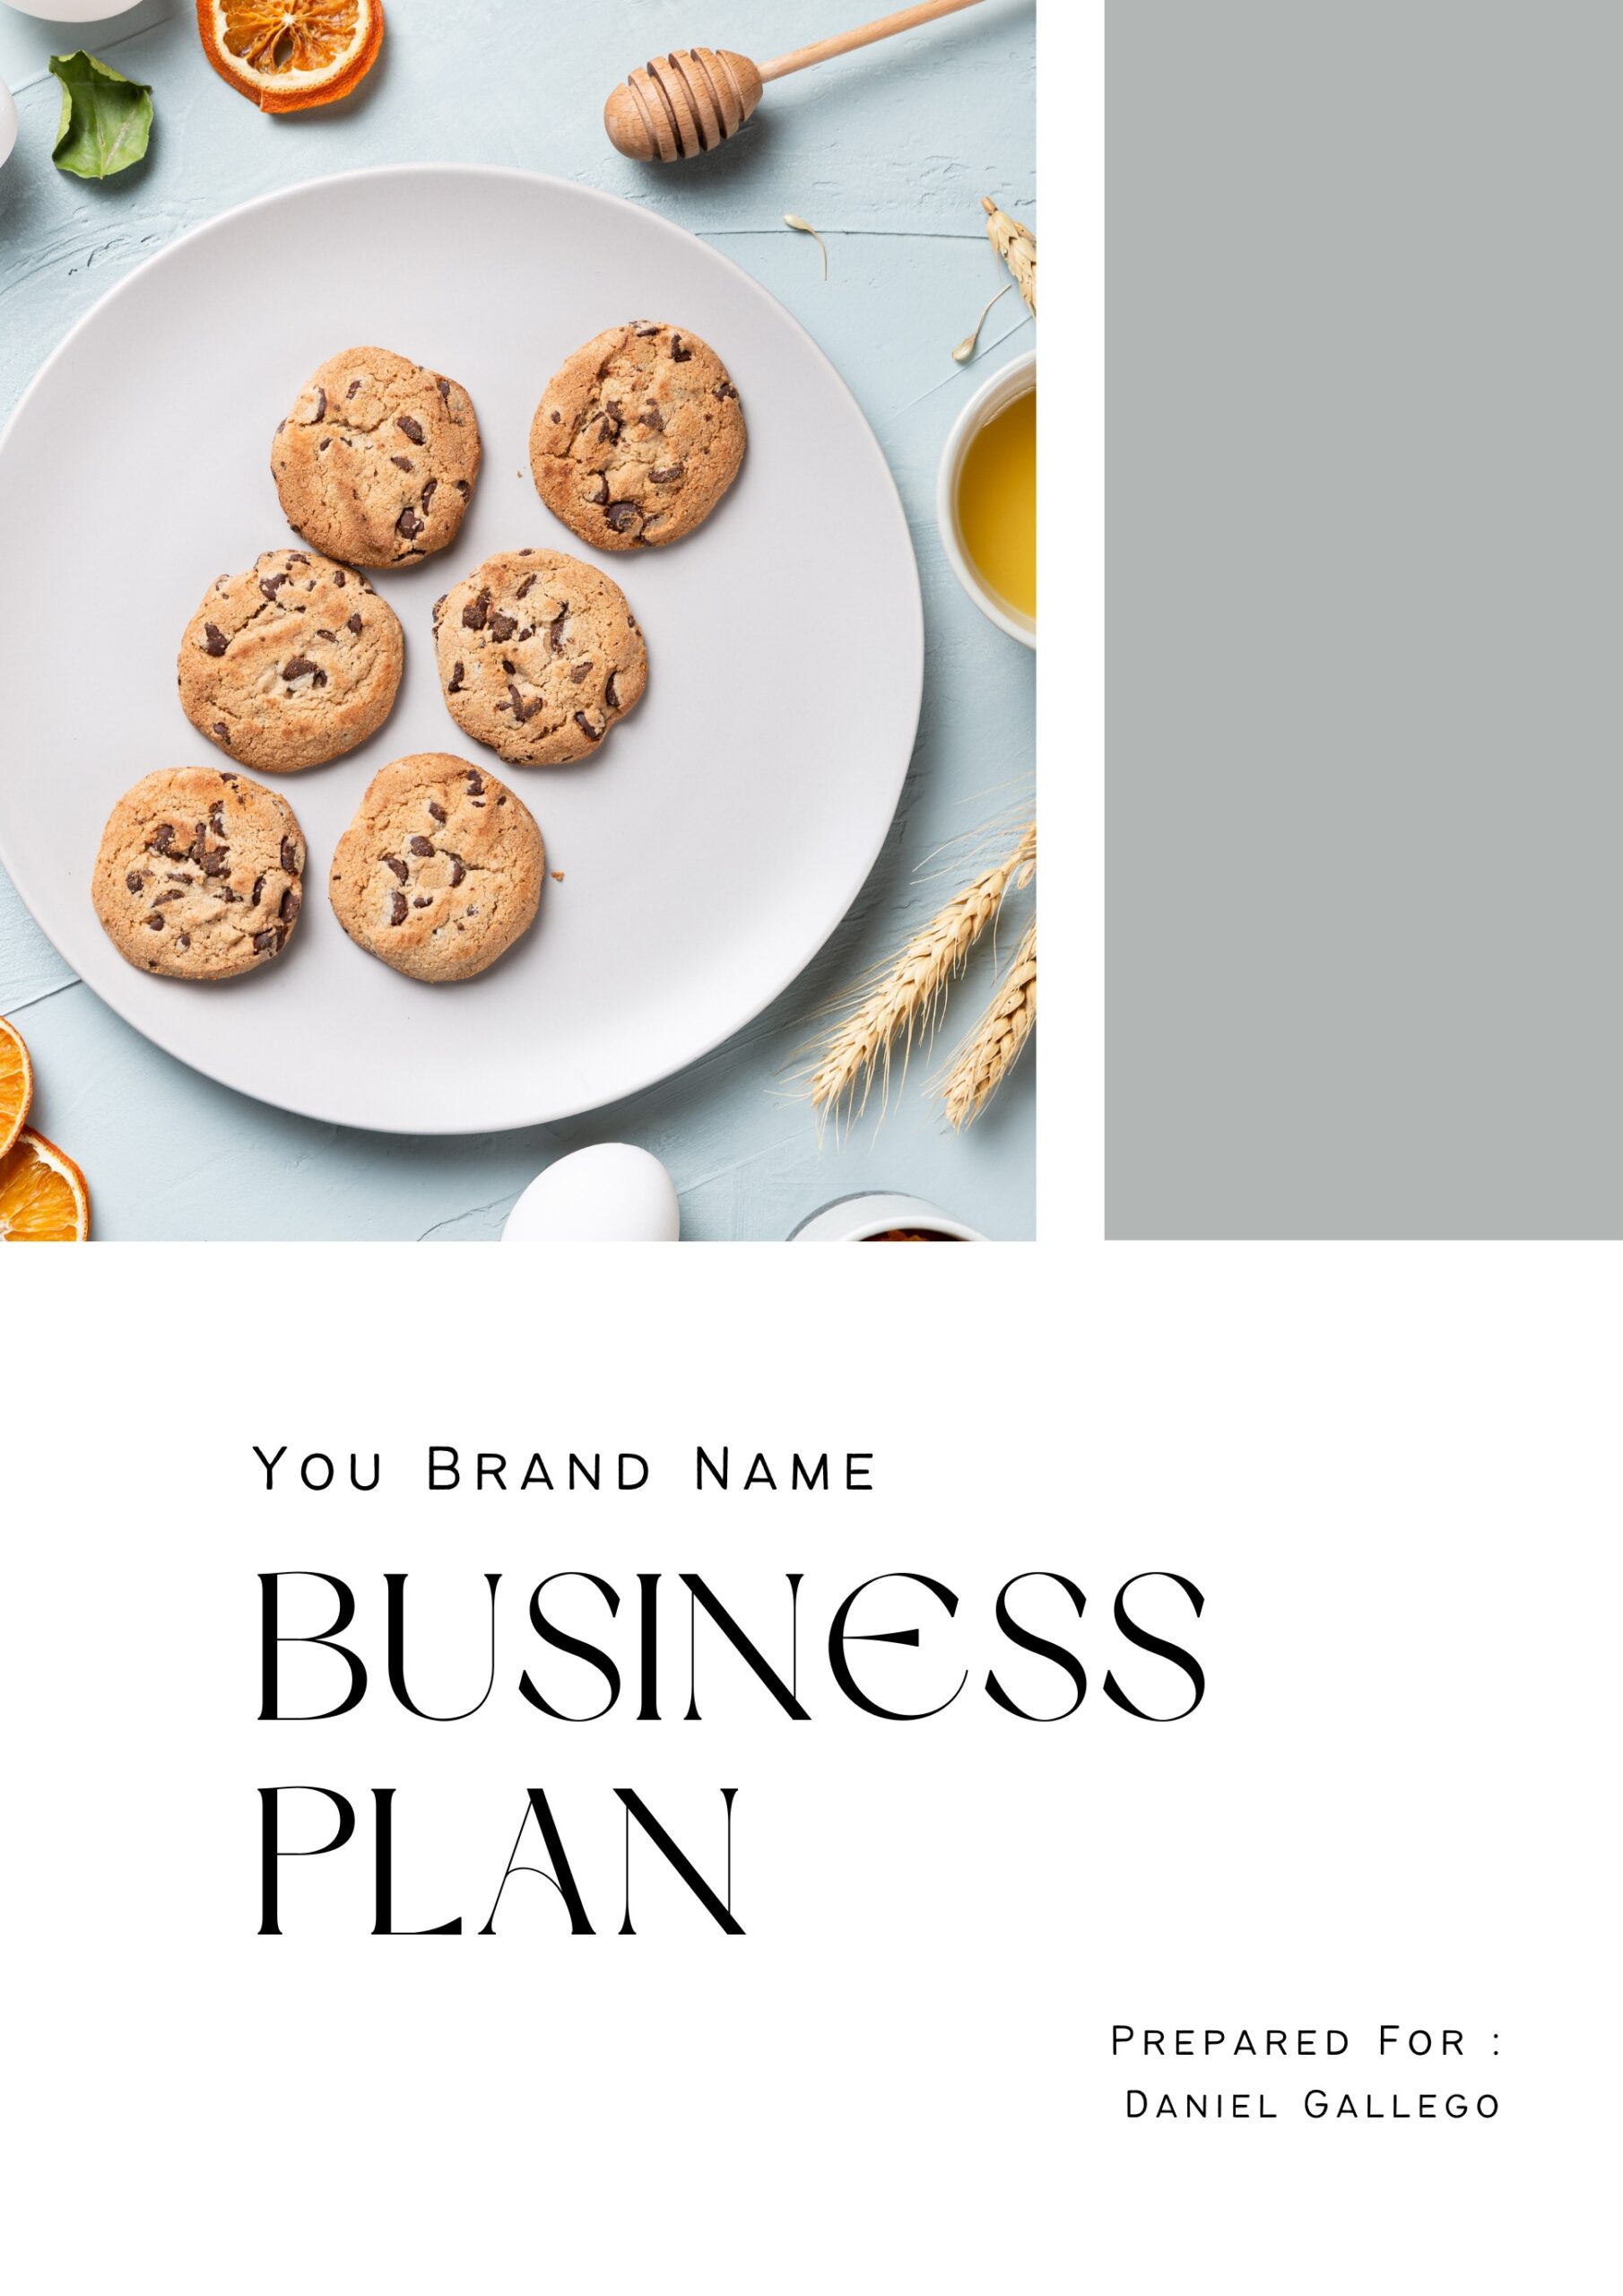 business plan for cookies pdf